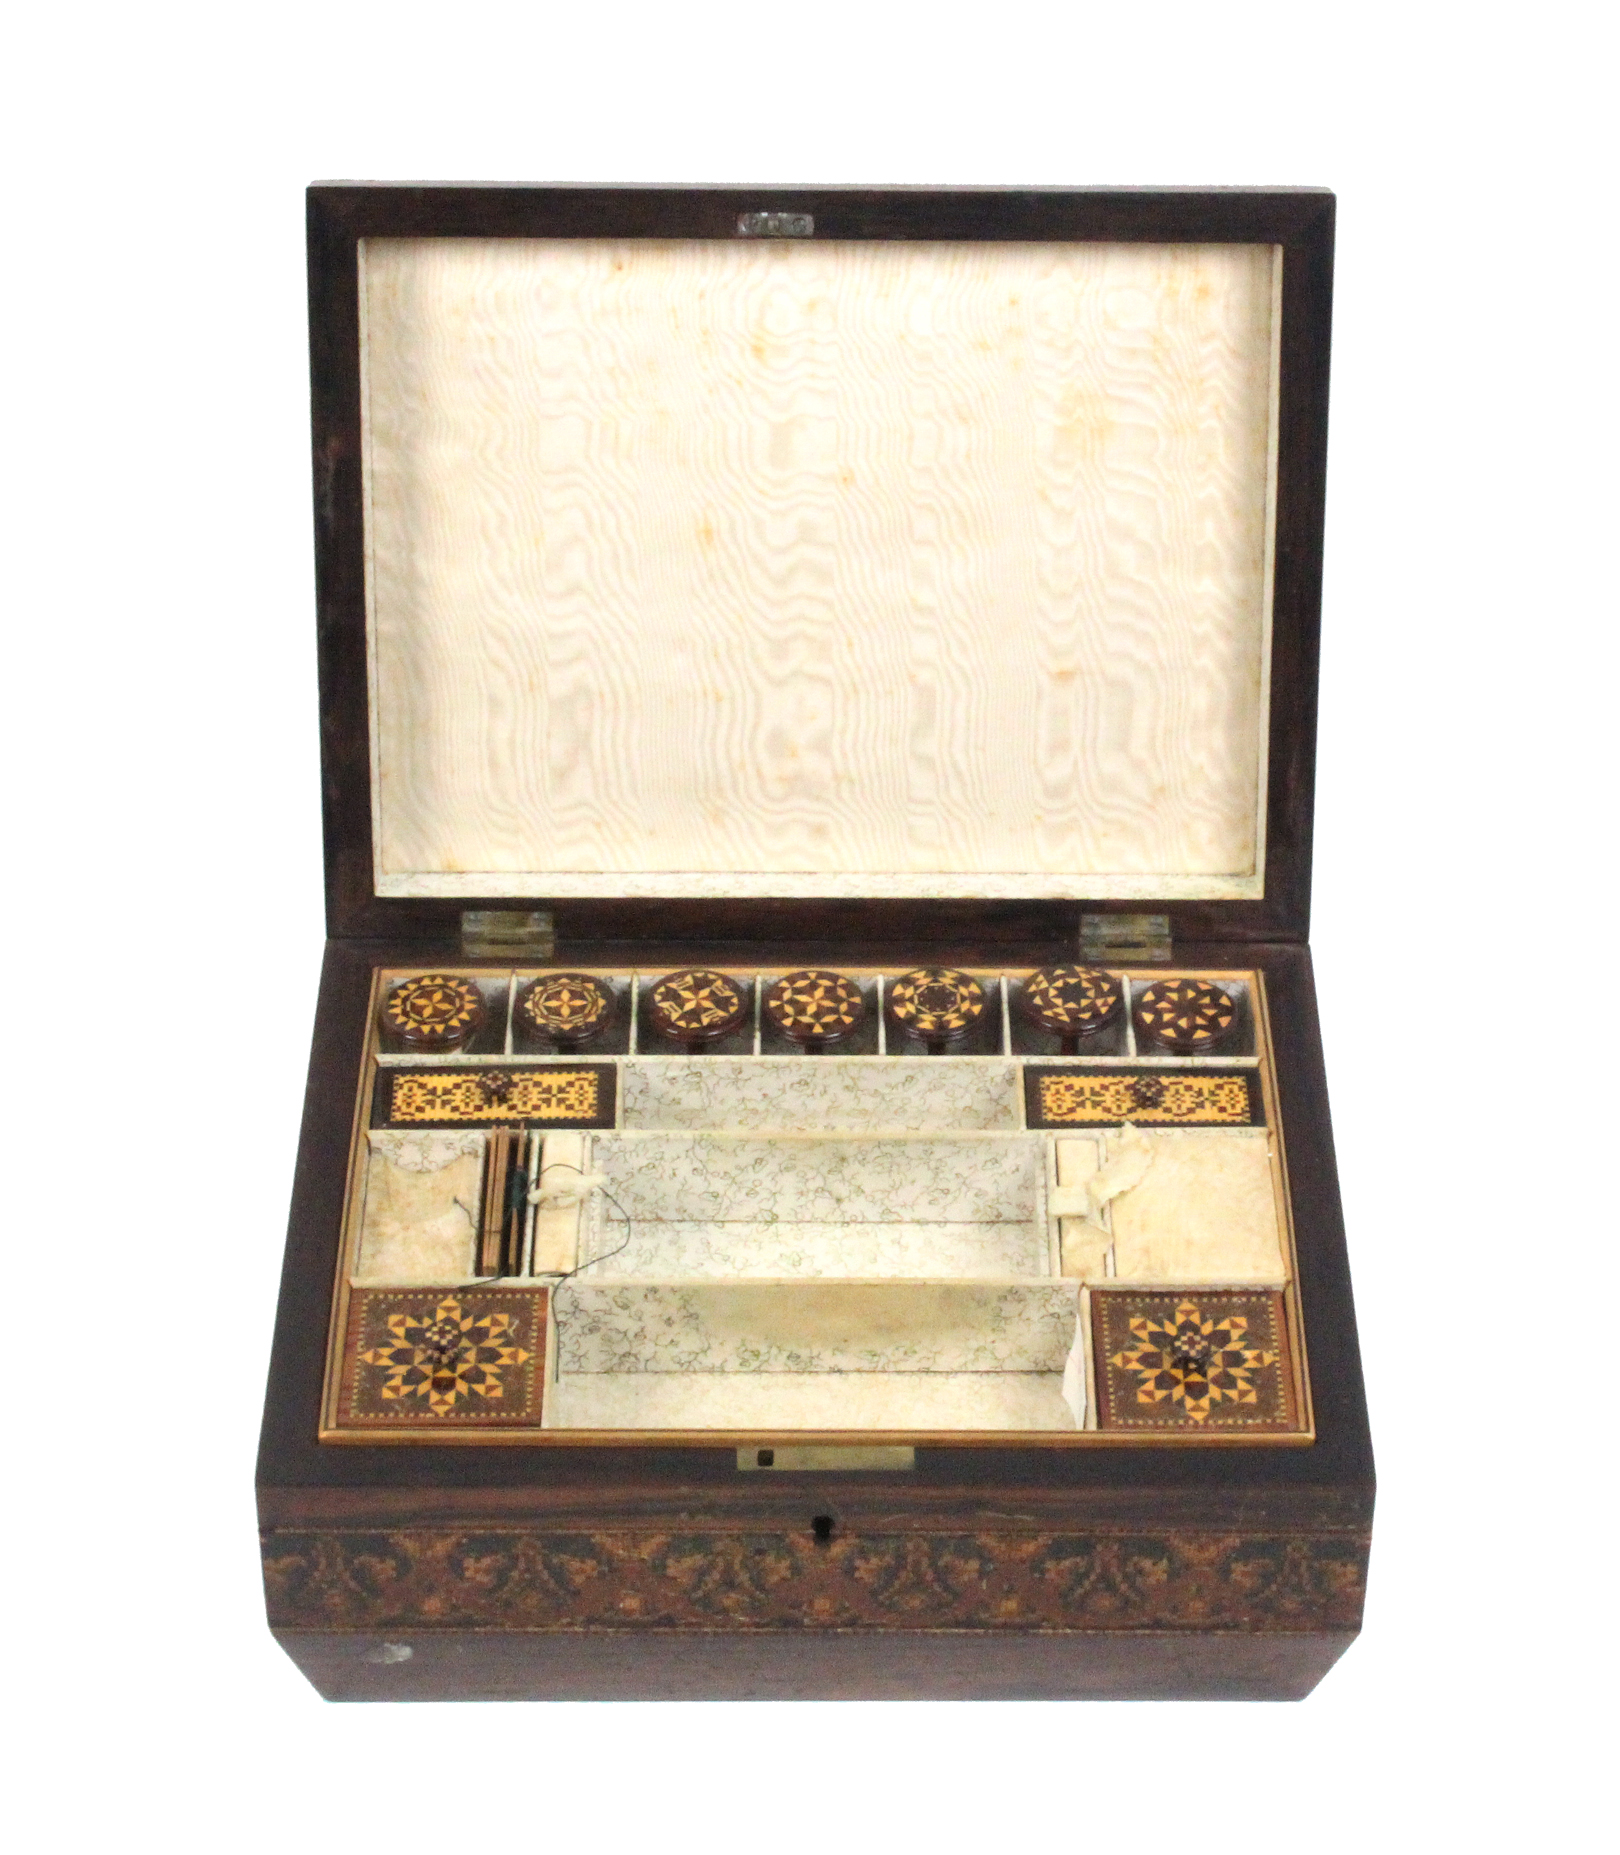 A Tunbridge ware rosewood sewing box of sarcophagal form, the lid with a view of Eridge Castle - Image 2 of 2